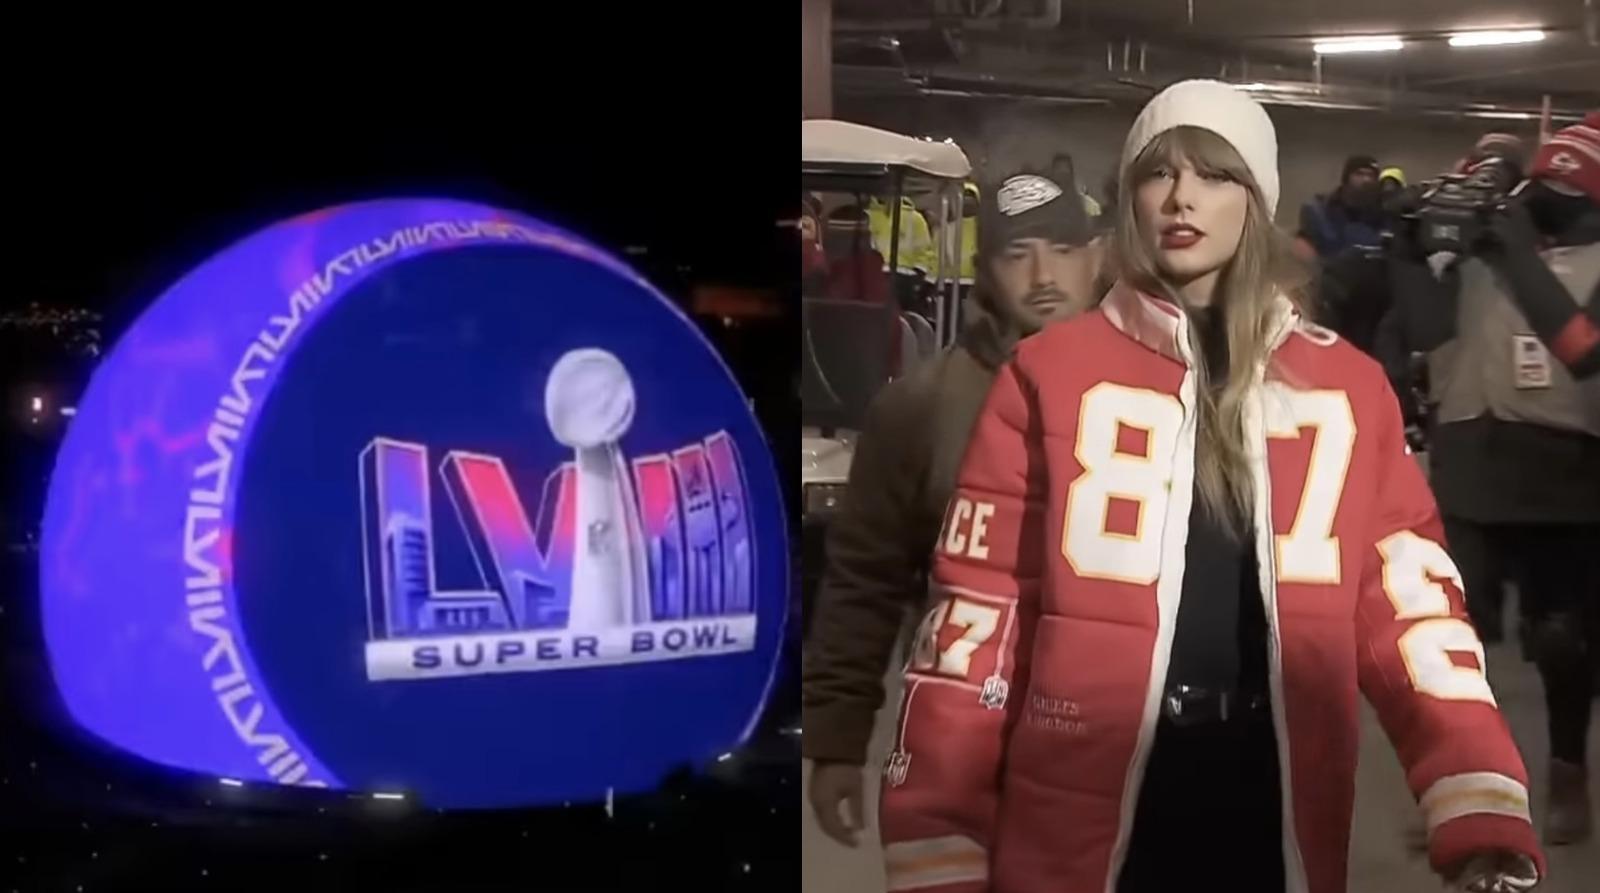 Swifties invade Super Bowl betting markets as strange Taylor Swift prop bets surface